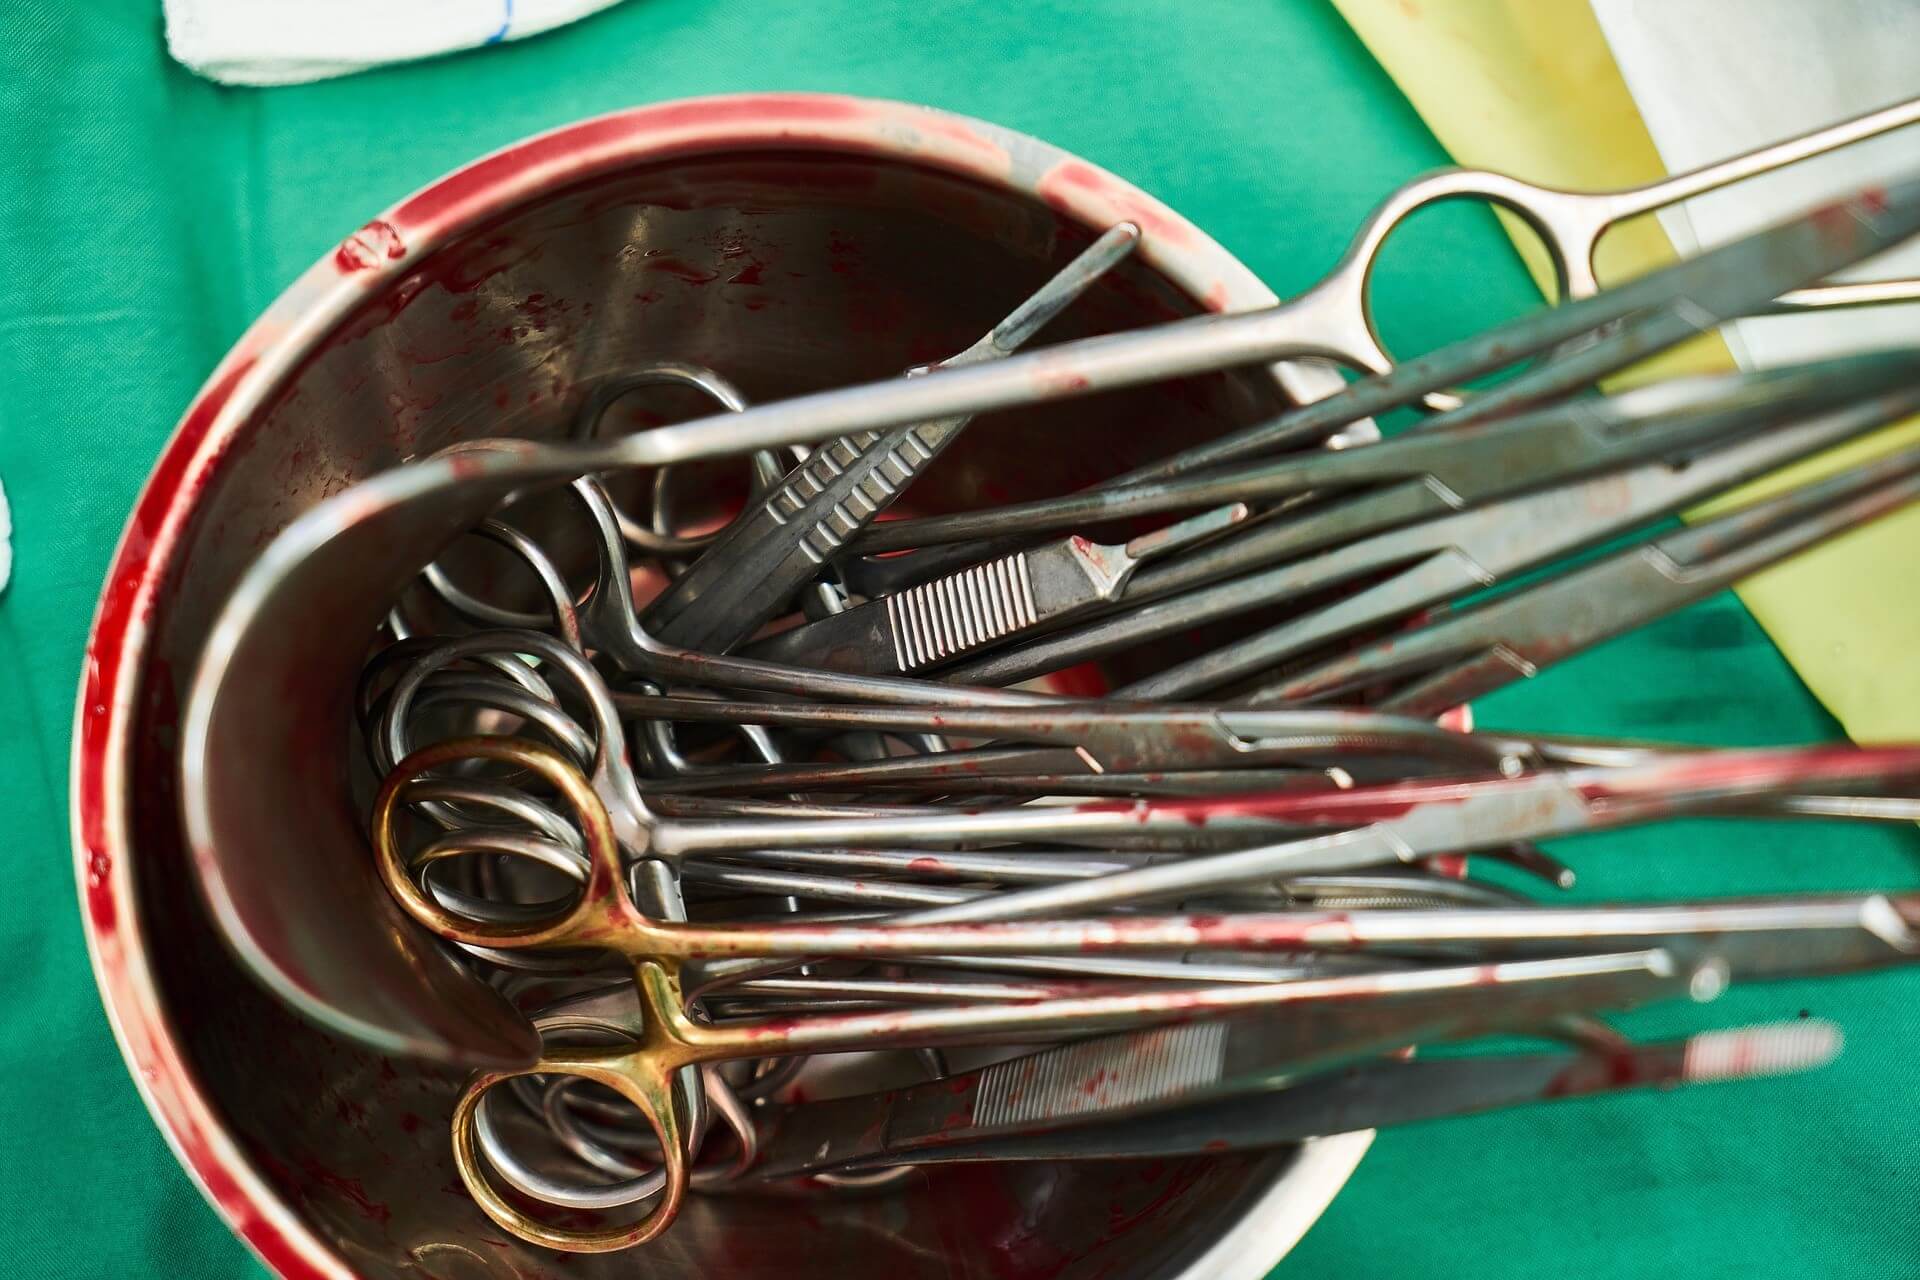 learn not to be grossed out by surgery